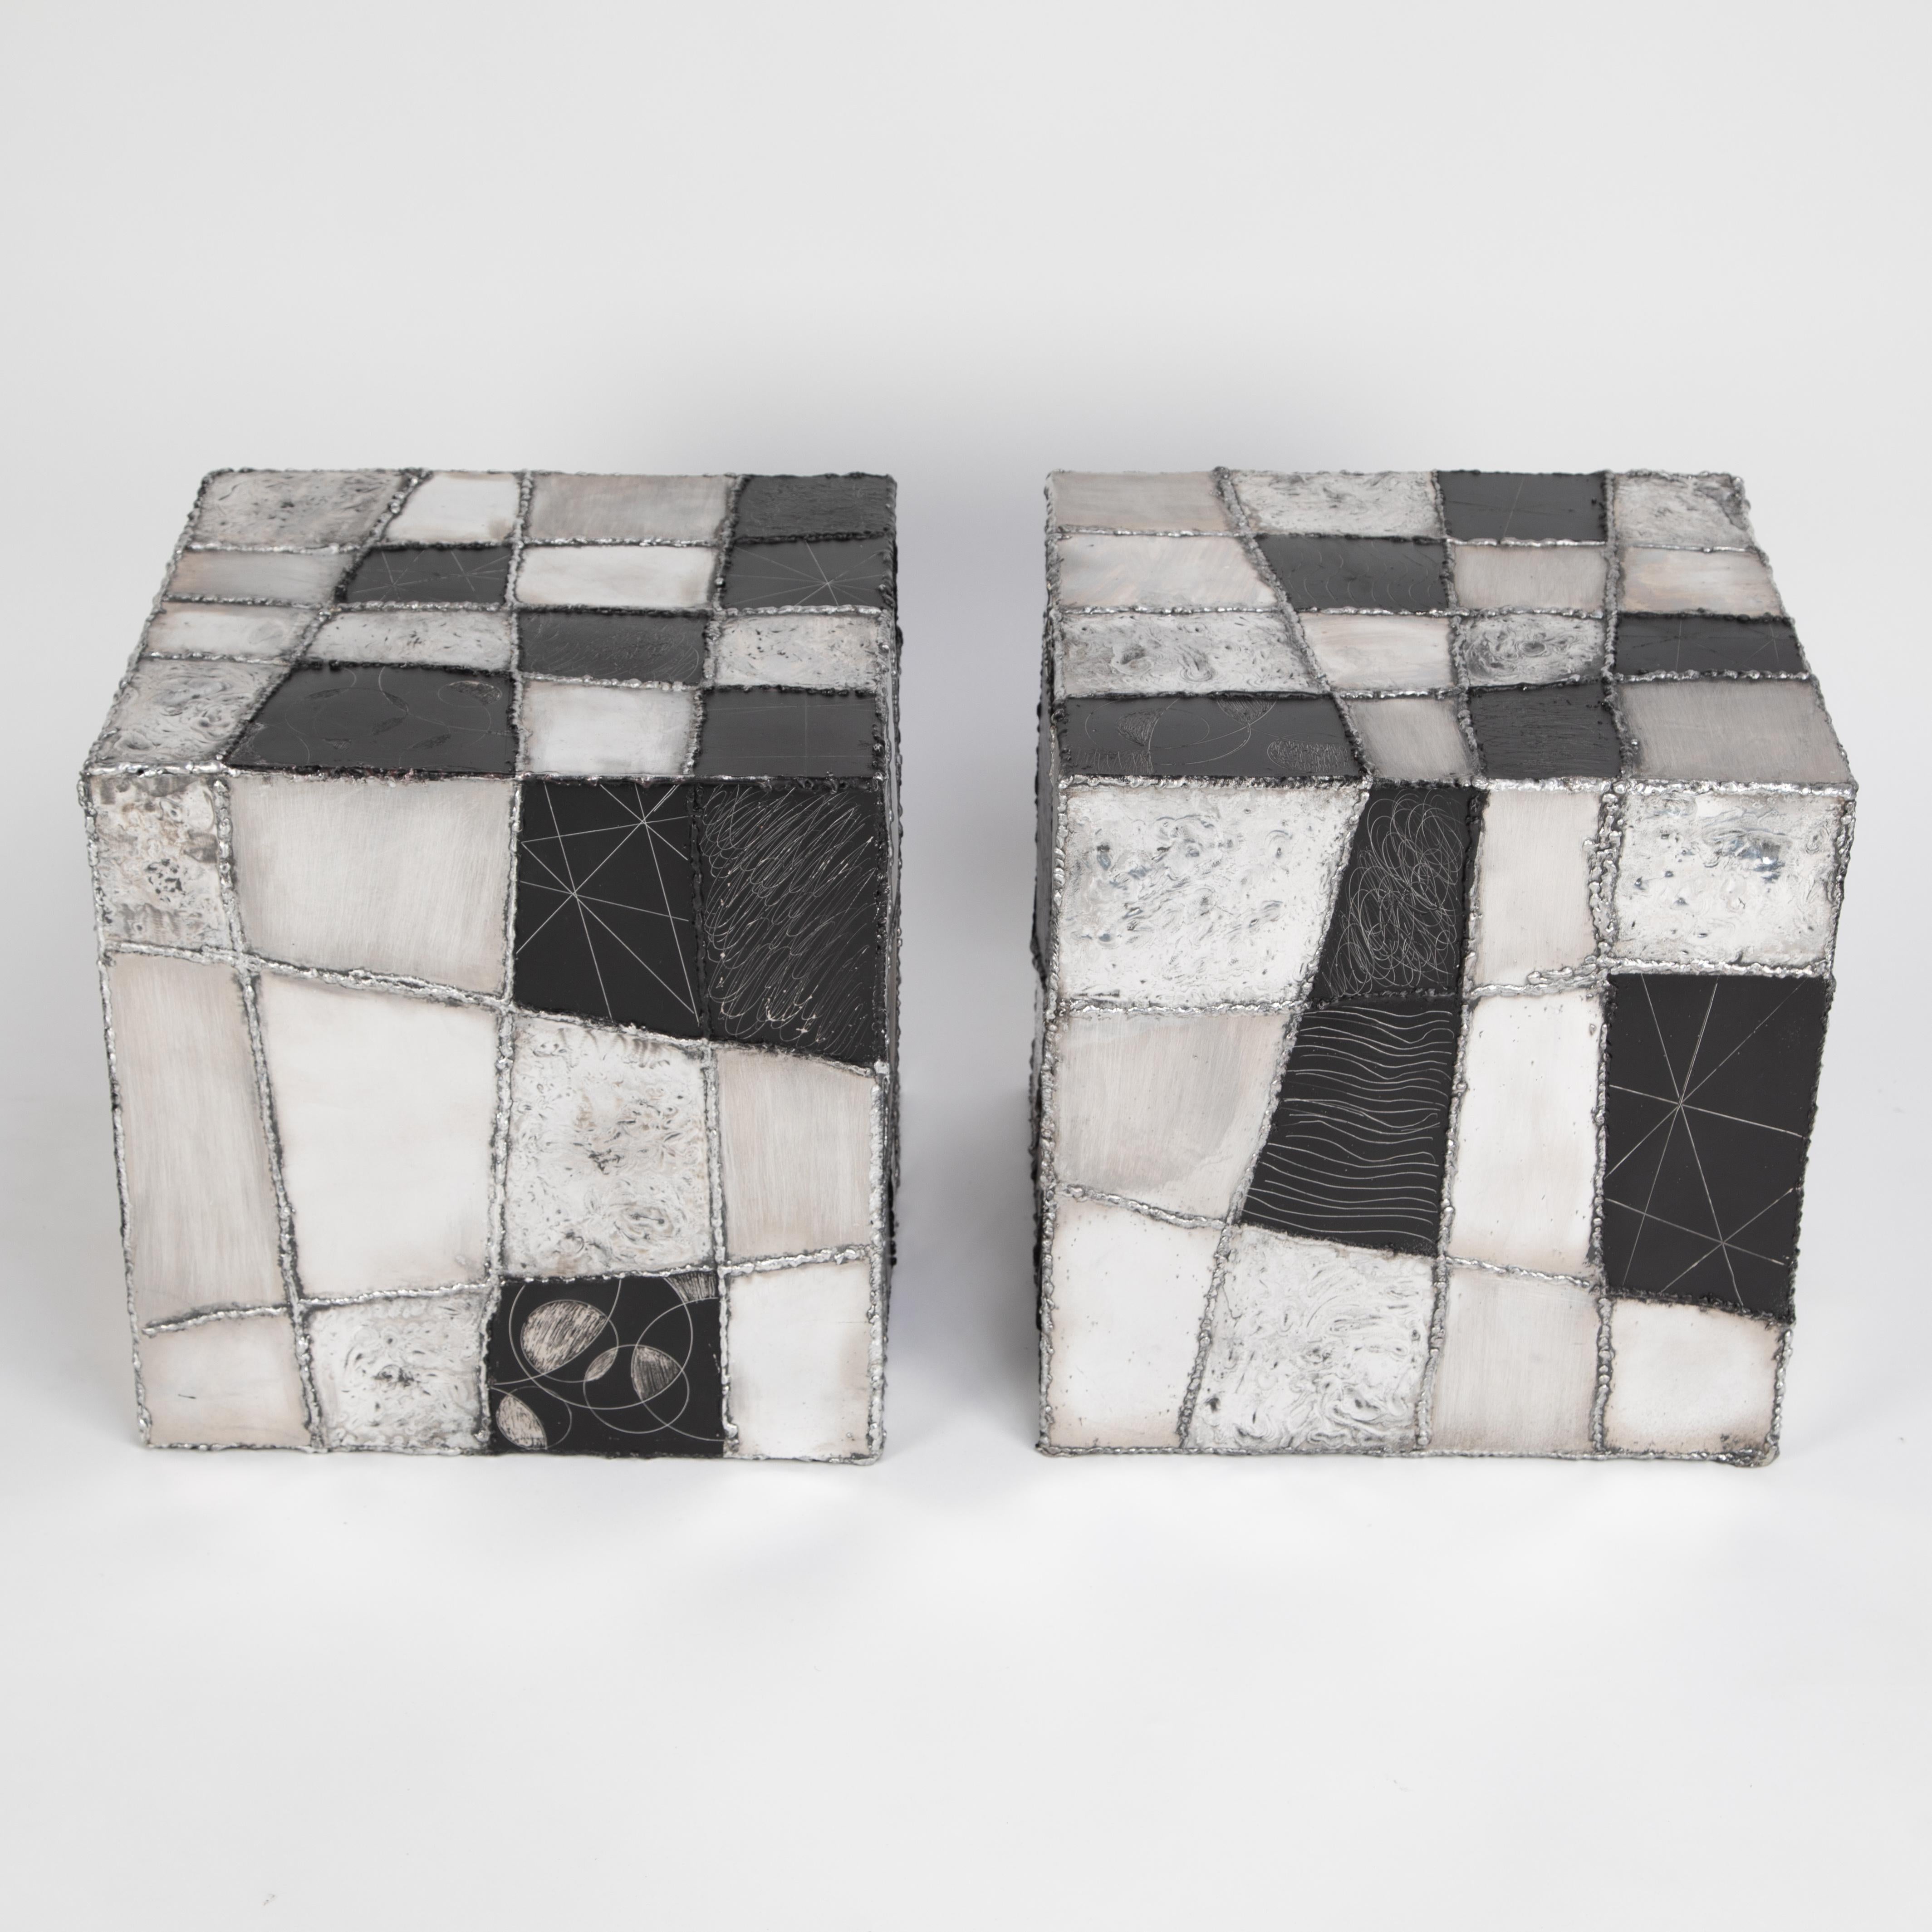 This pair of Paul Evans side tables is a rare and outstanding example of the Pennsylvania artist's 